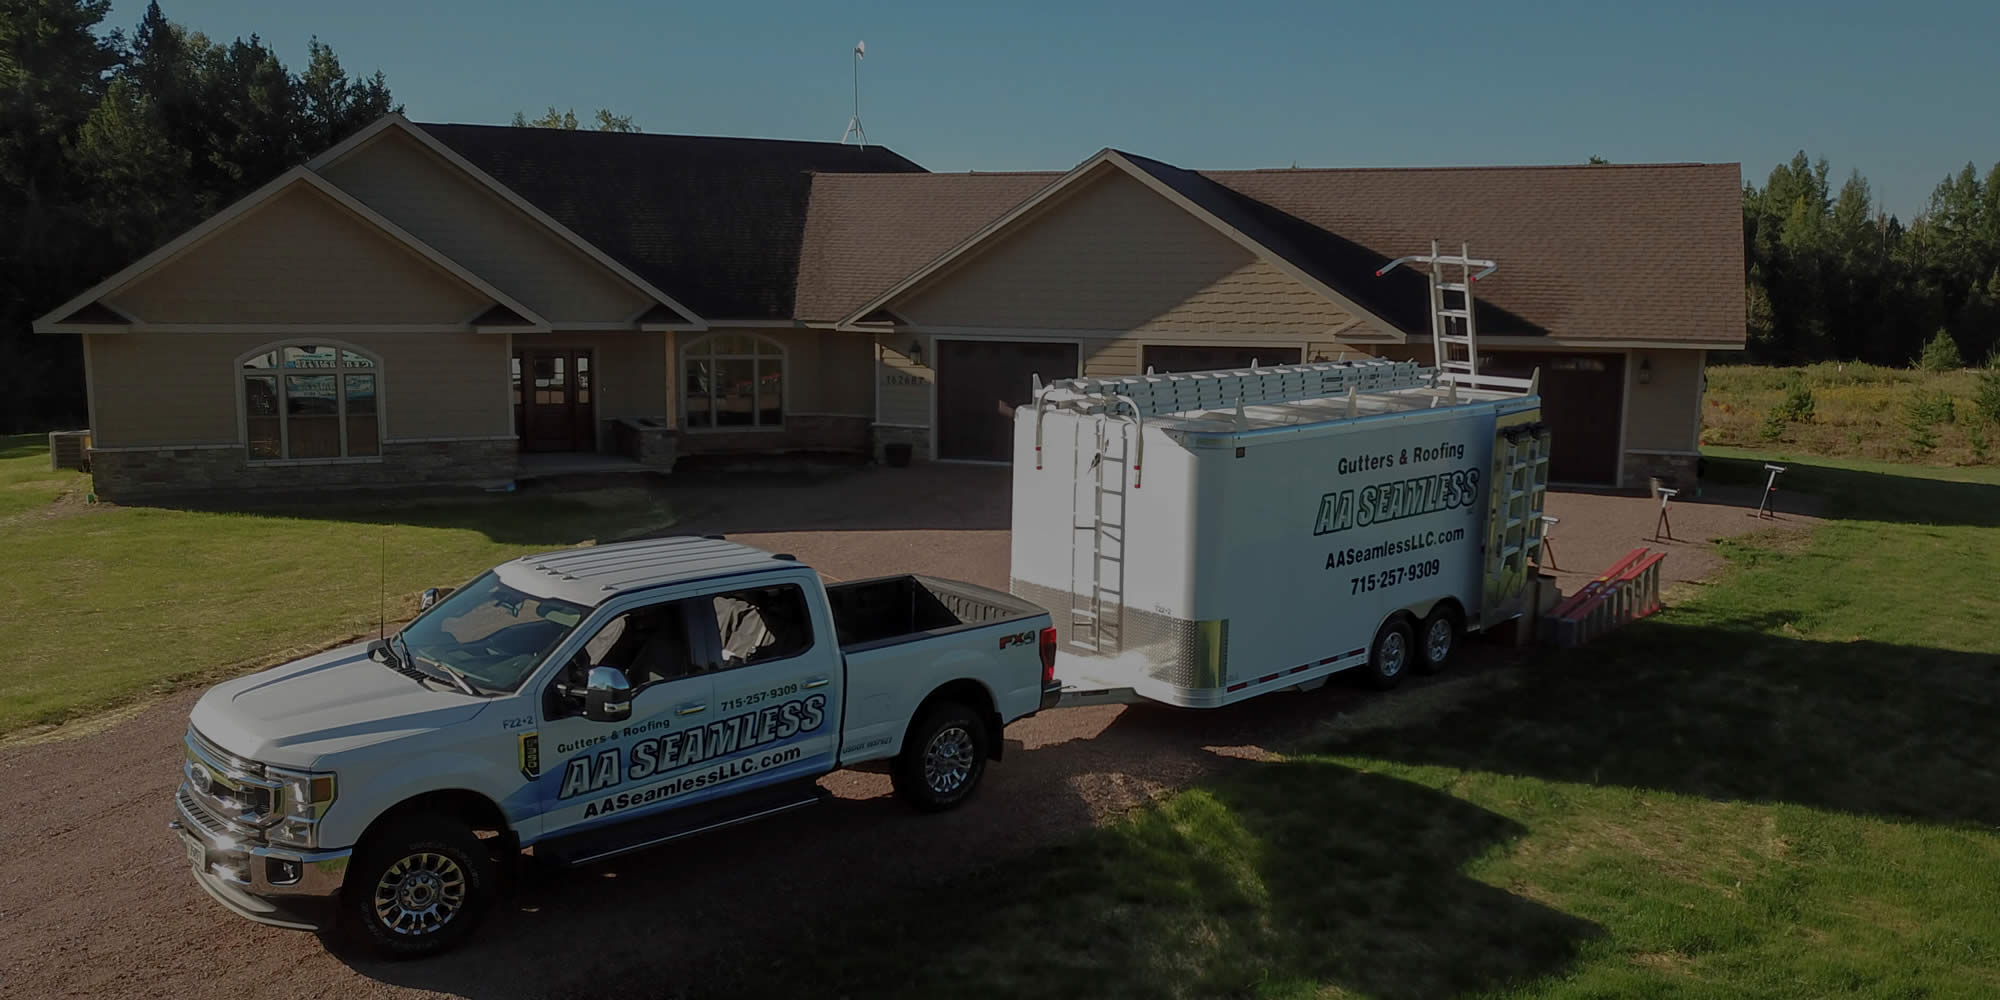 Gutter and Roofing Services Wisconsin